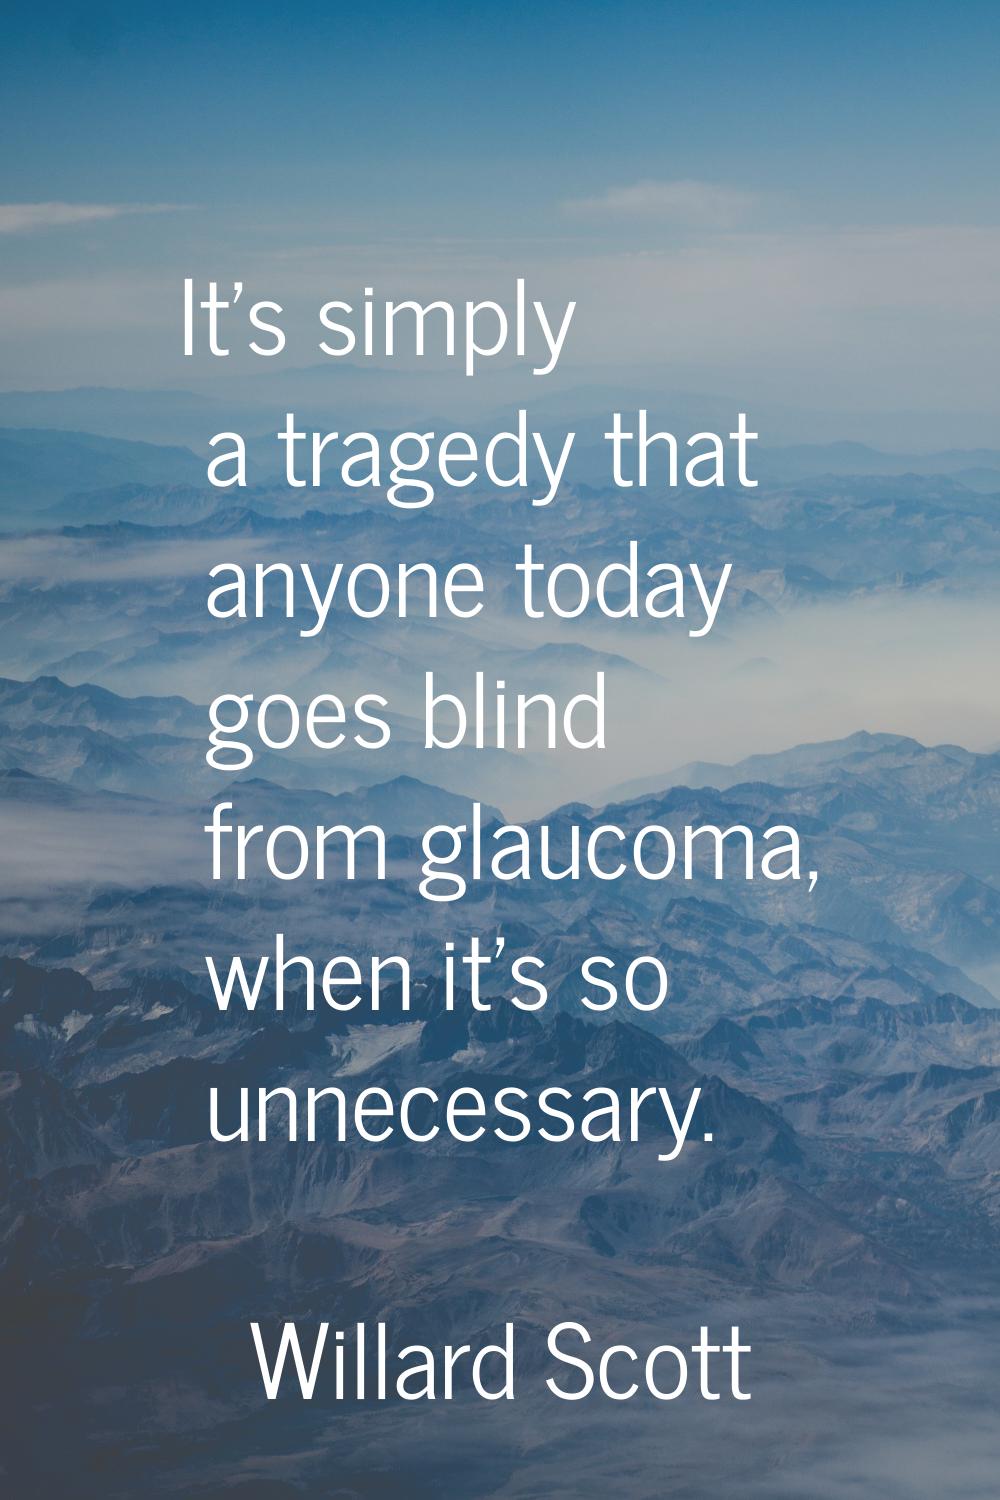 It's simply a tragedy that anyone today goes blind from glaucoma, when it's so unnecessary.